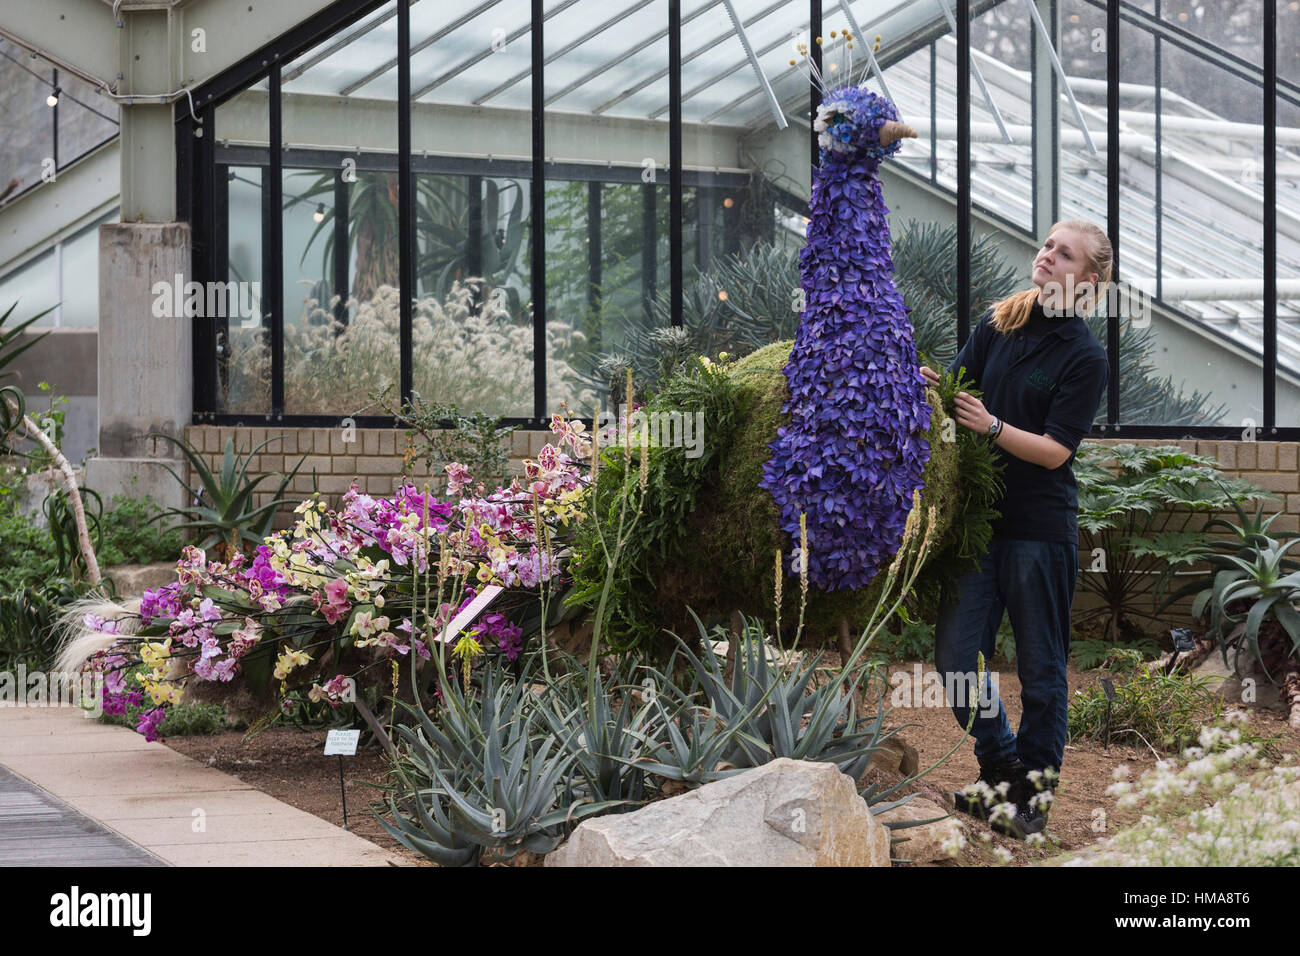 London, UK. 2nd Feb, 2017. Kew Diploma Student Ailsa Kemp working on an orchid display. Press preview of the Kew Gardens 2017 Orchids Festival which opens to the public on Saturday, 4 February in the Princess of Wales Conservatory. The 22nd annual Kew Orchid Festival is a colourful celebration of India's vibrant plants and culture. It took Kew staff and volunteers 1,600 hours to create. 3,600 orchids are on display until 5 March 2017. Credit: Vibrant Pictures/Alamy Live News Stock Photo